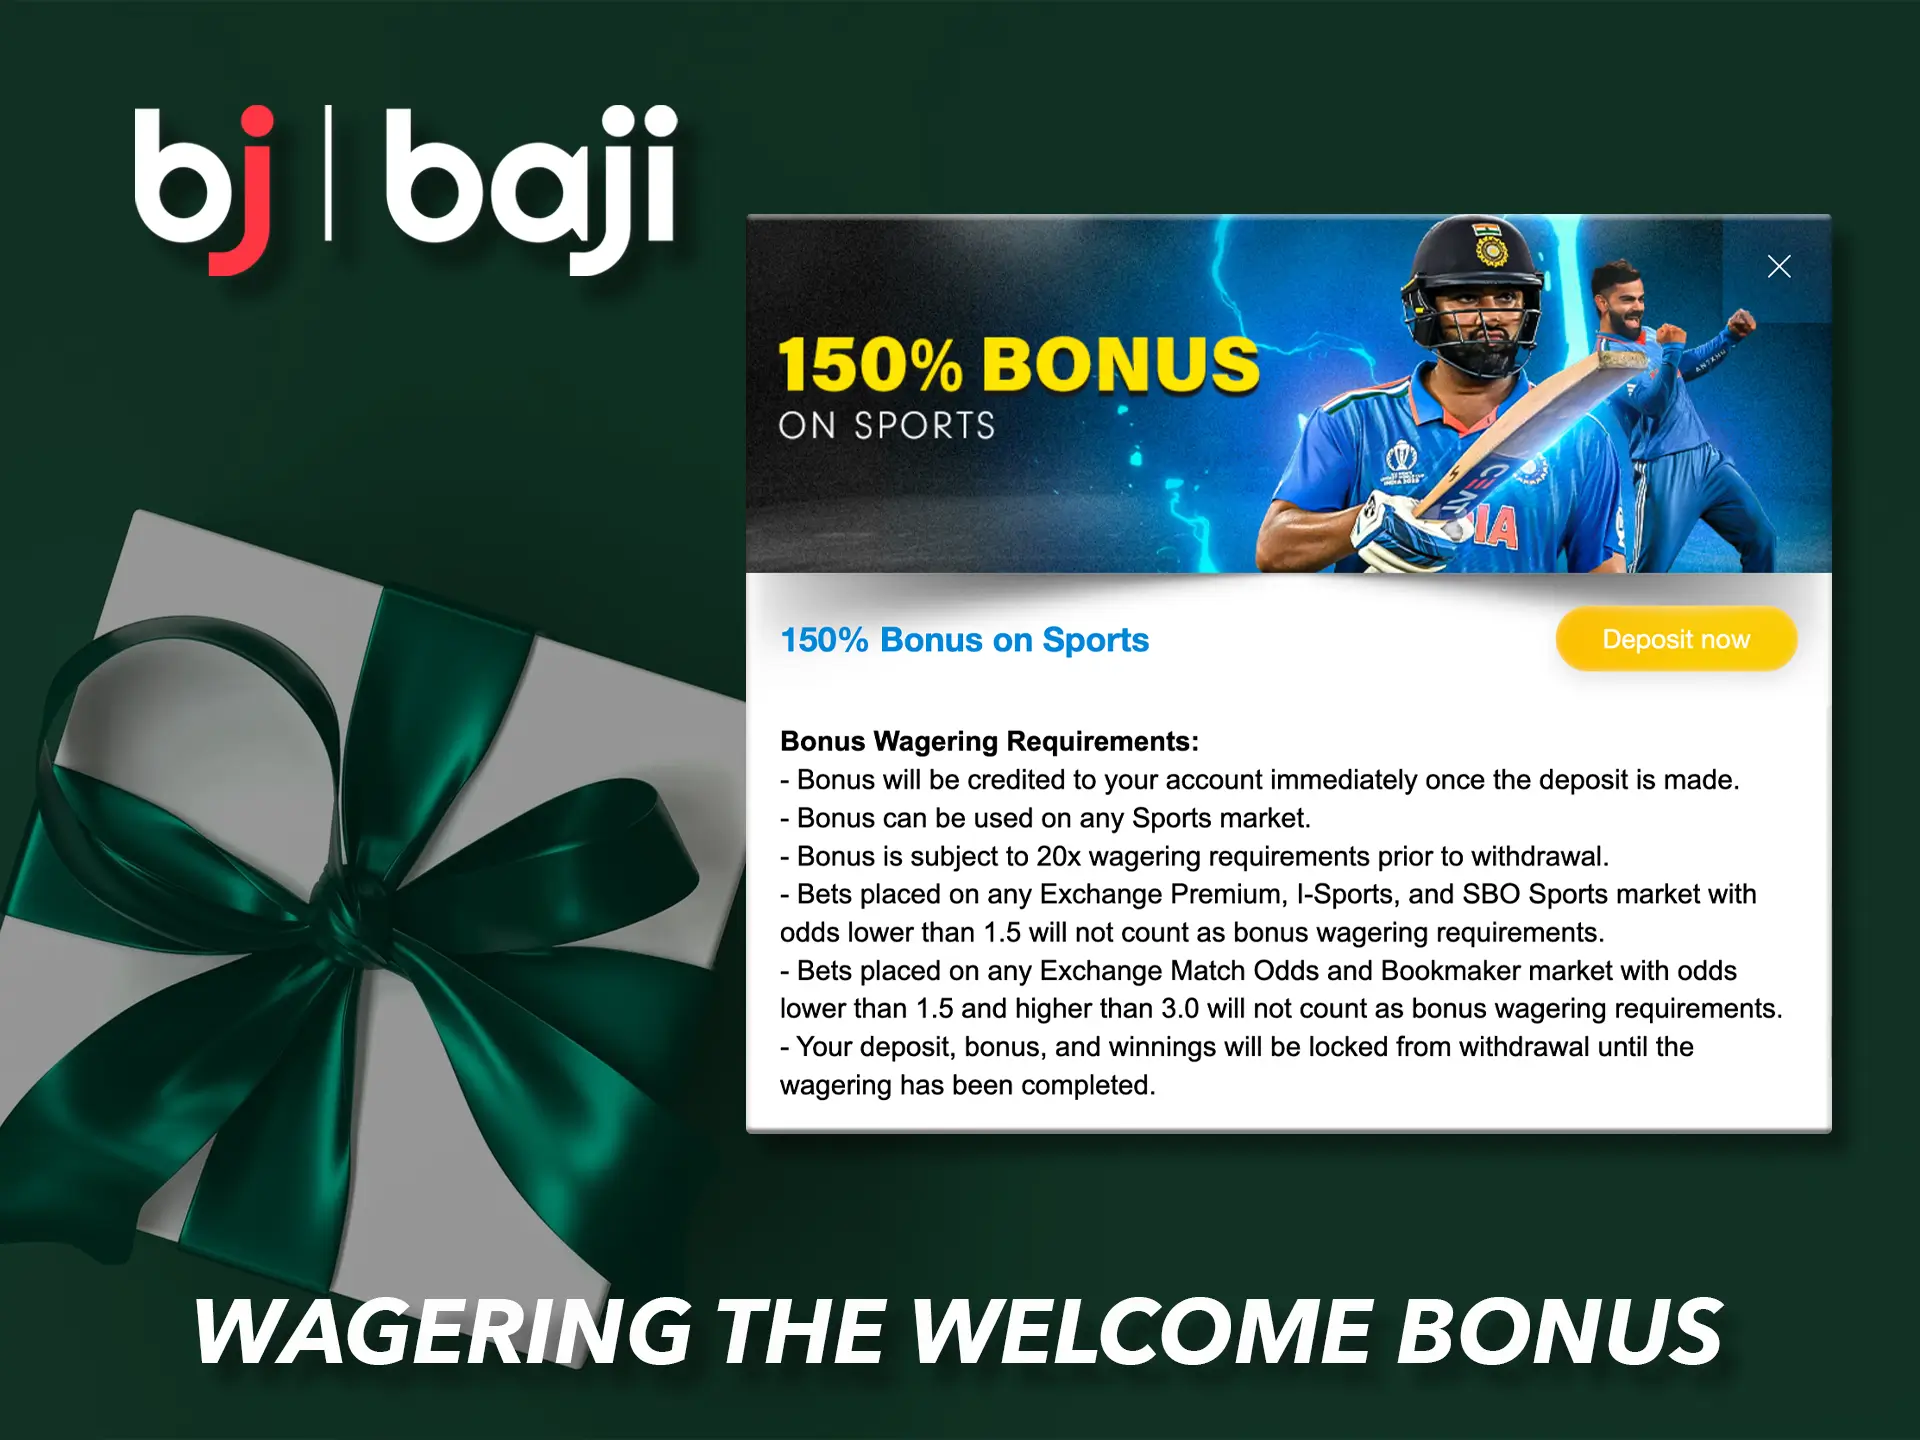 Read the wagering bonus terms and conditions from Baji Casino.